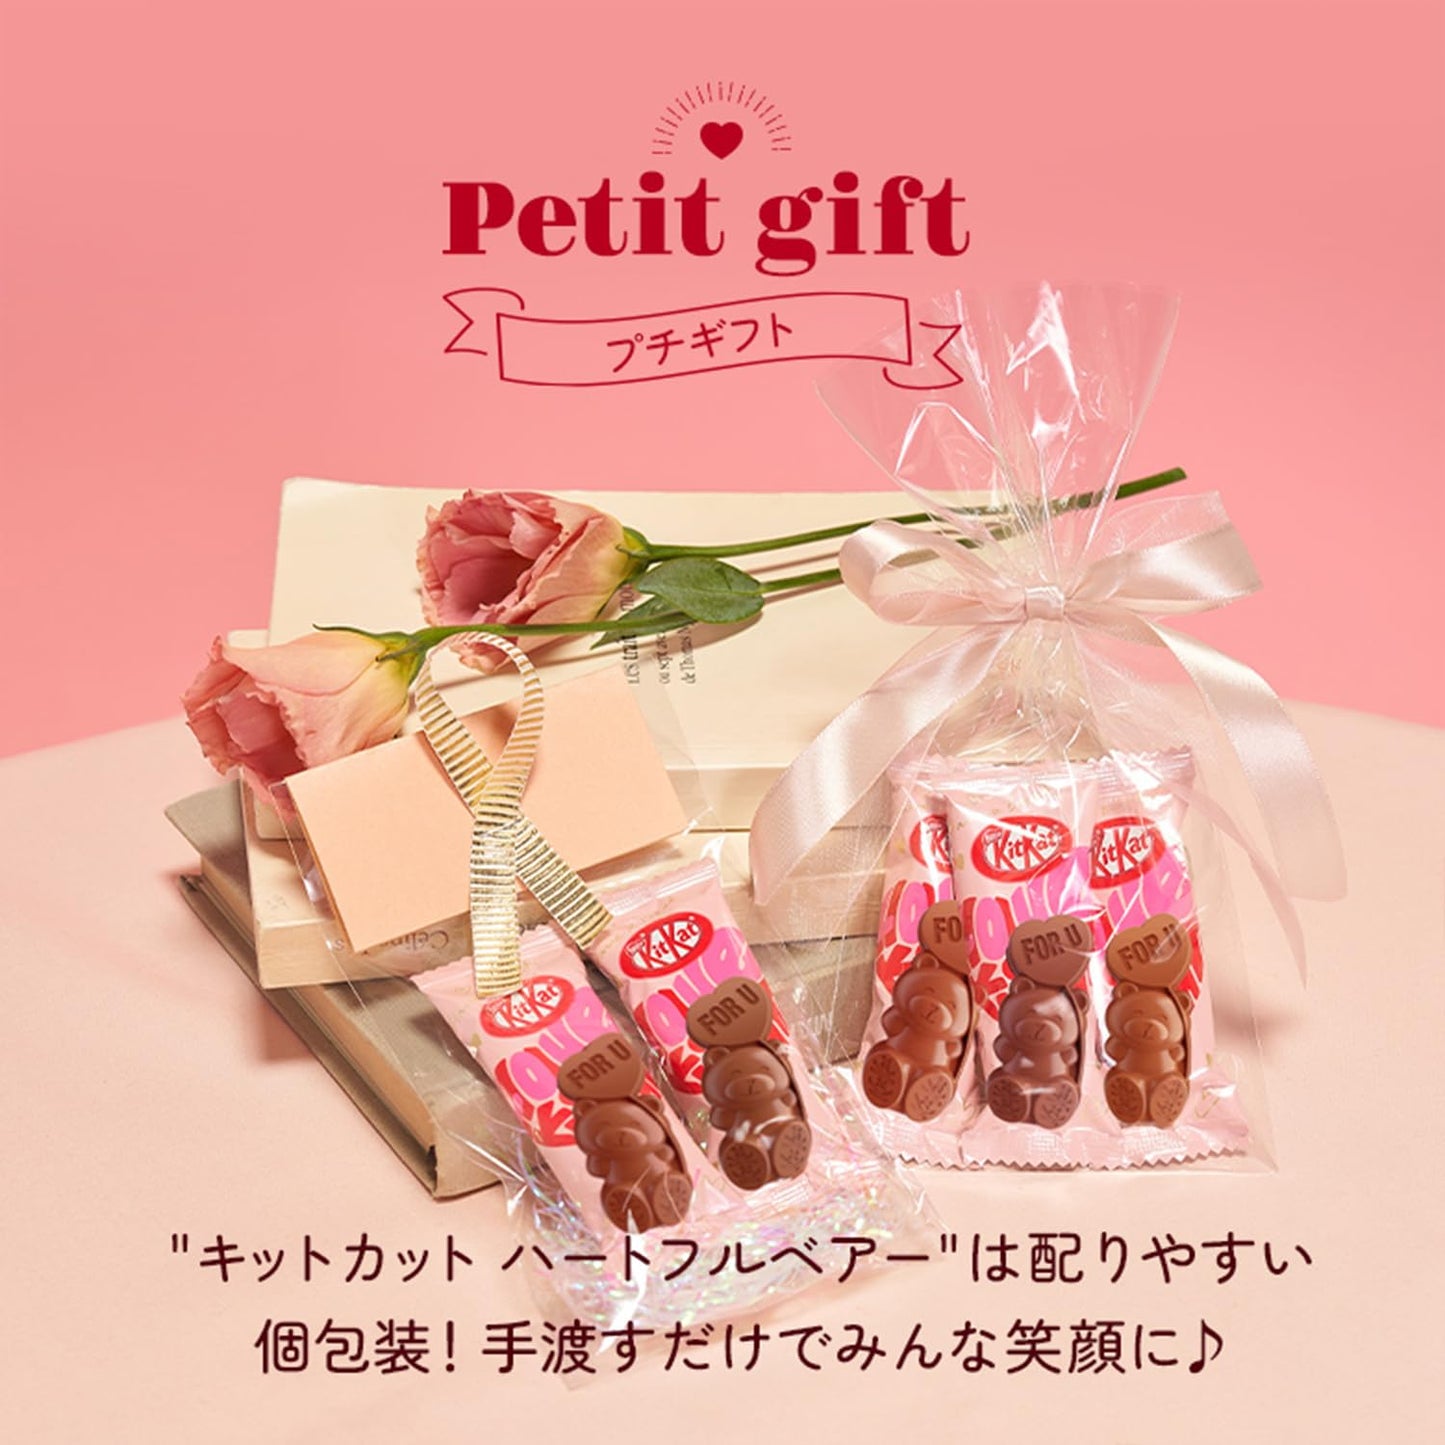 Nestle Japan KitKat Heartful Bear Heart Shaped Can 7 Special Kitkat Pieces Inside | Made in Japan | Valentine's Day Gift | Gift Box | Kitkat from Japan